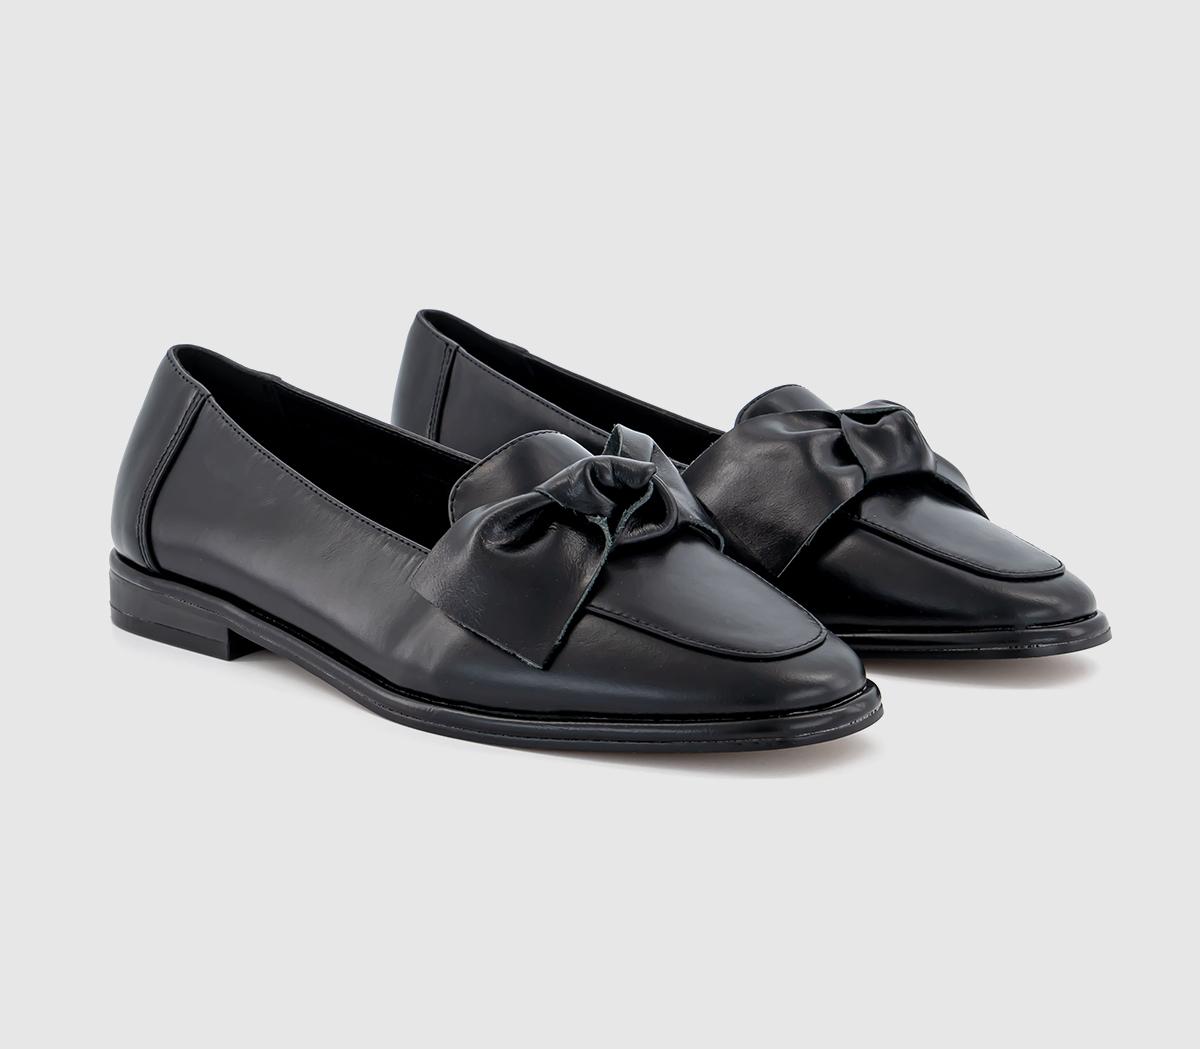 OFFICE Womens Fallon Bow Leather Loafer Black, 7